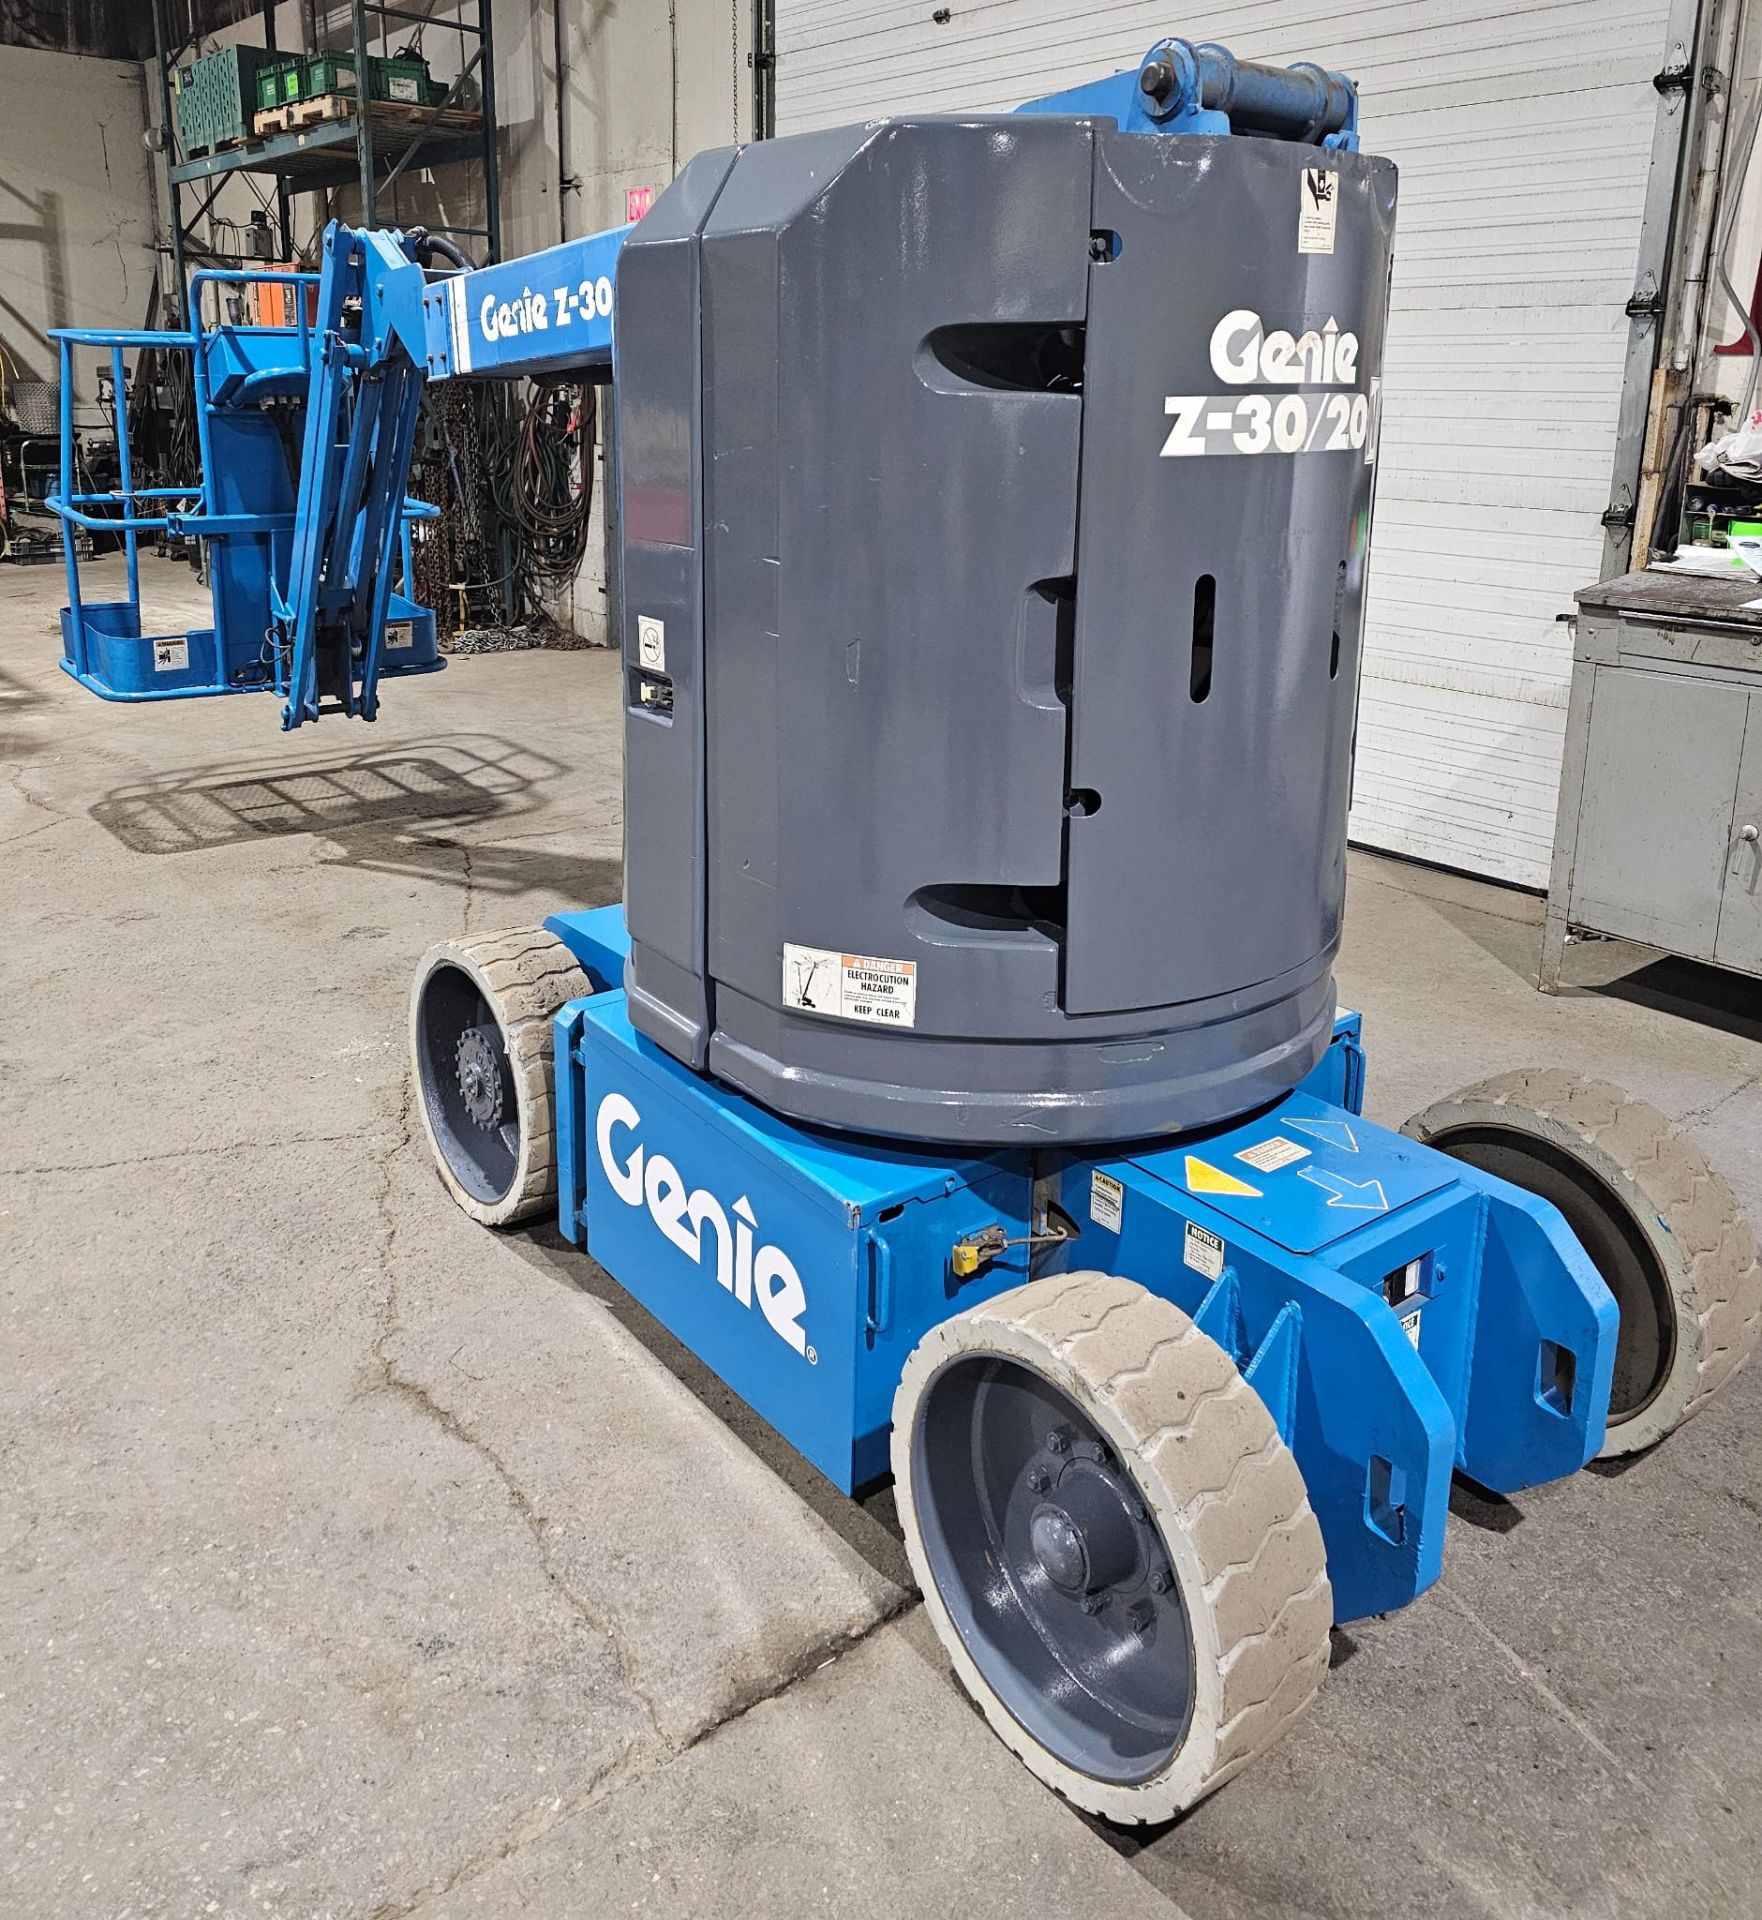 Genie model Z-30-N Zoom Boom Electric Motorized Man Lift 30' Height & 21' Reach - with 24V Battery - Image 2 of 10